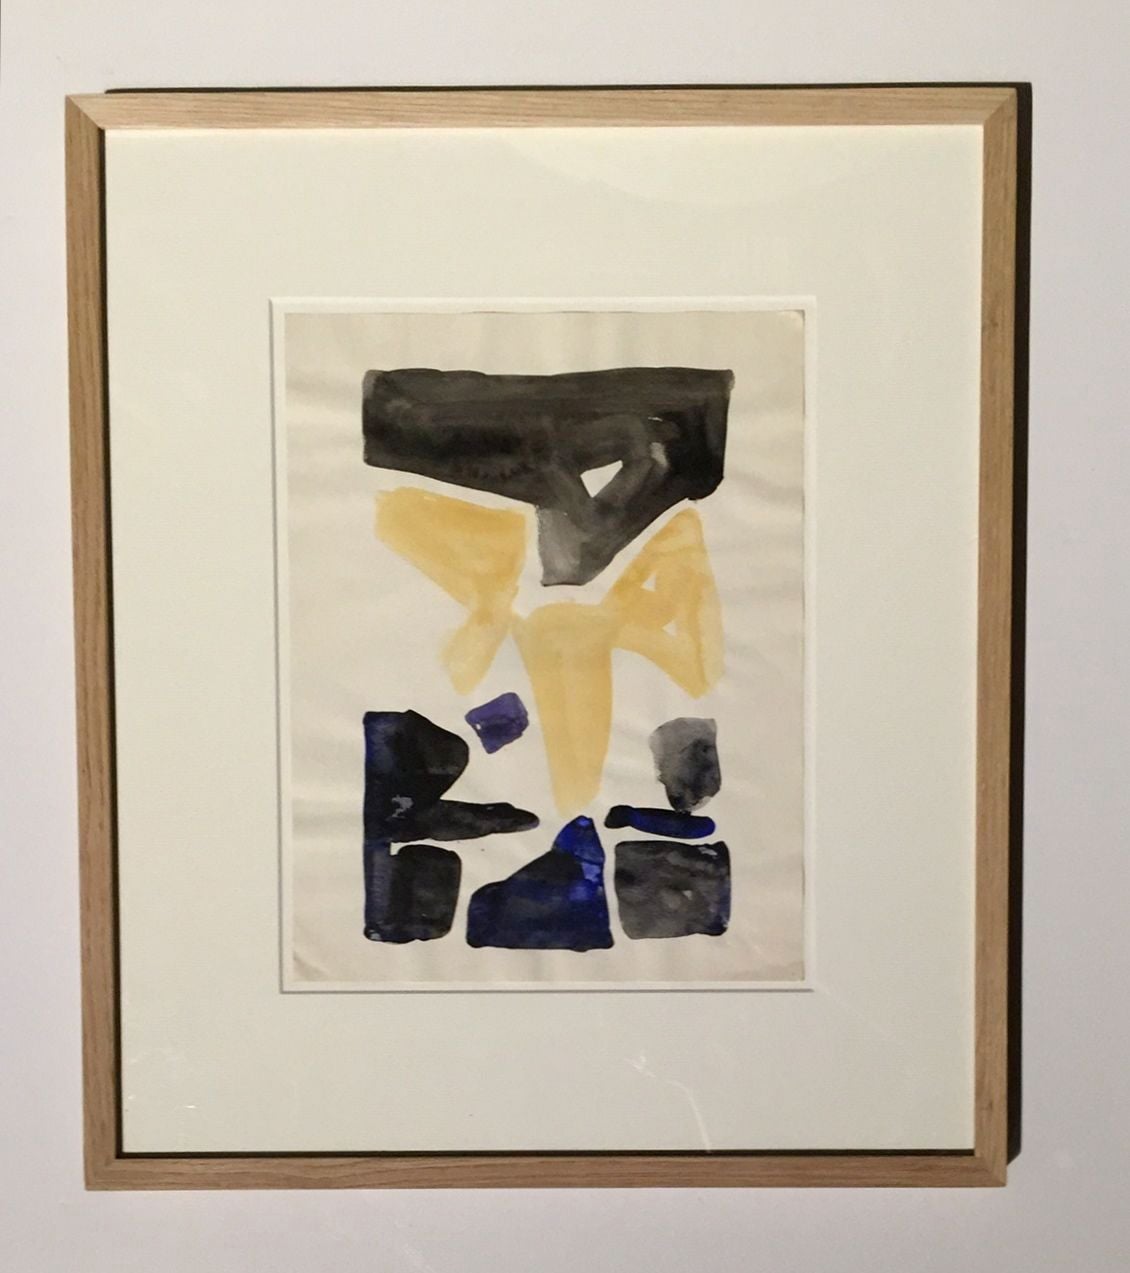 Contemporary water colors by French artist Jacques Nestle, 1907-1991.
A collection of five paintings are available and sold individually.
Matted and in neutral wood frames.